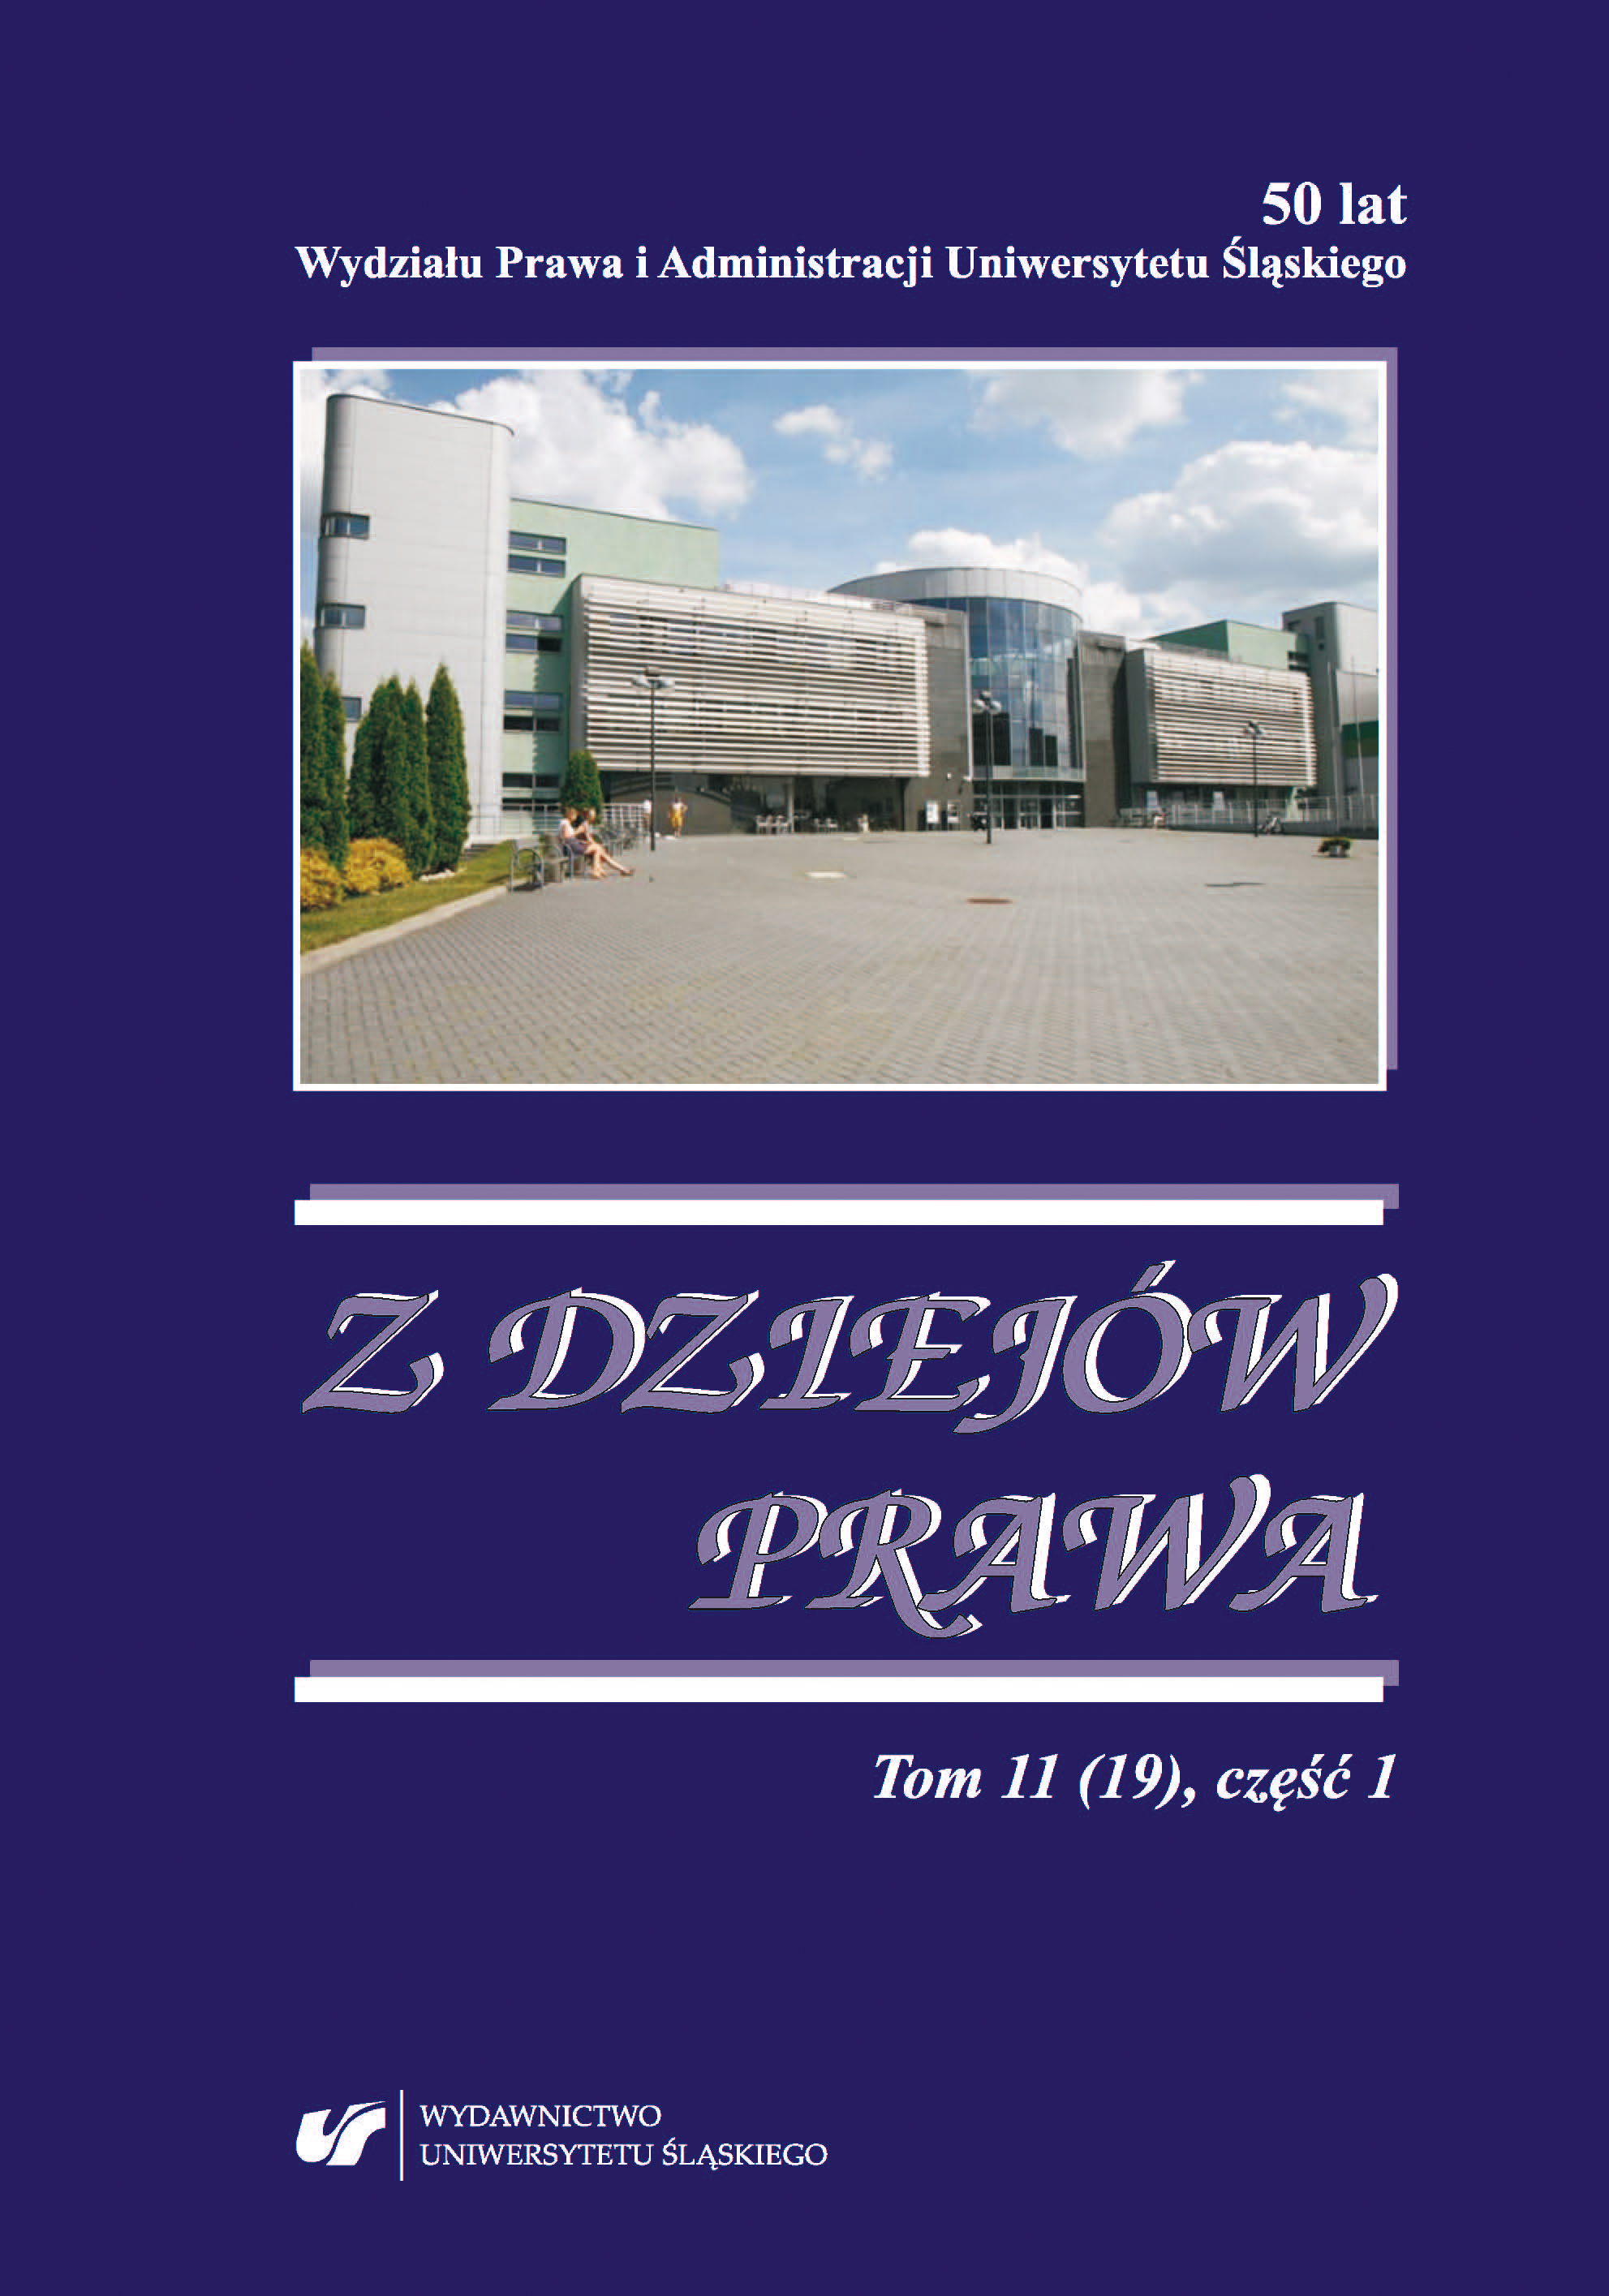 The Study of Business and Trade Law at the Faculty of Law and Administration of the University of Silesia in the years 1968—2018 Cover Image